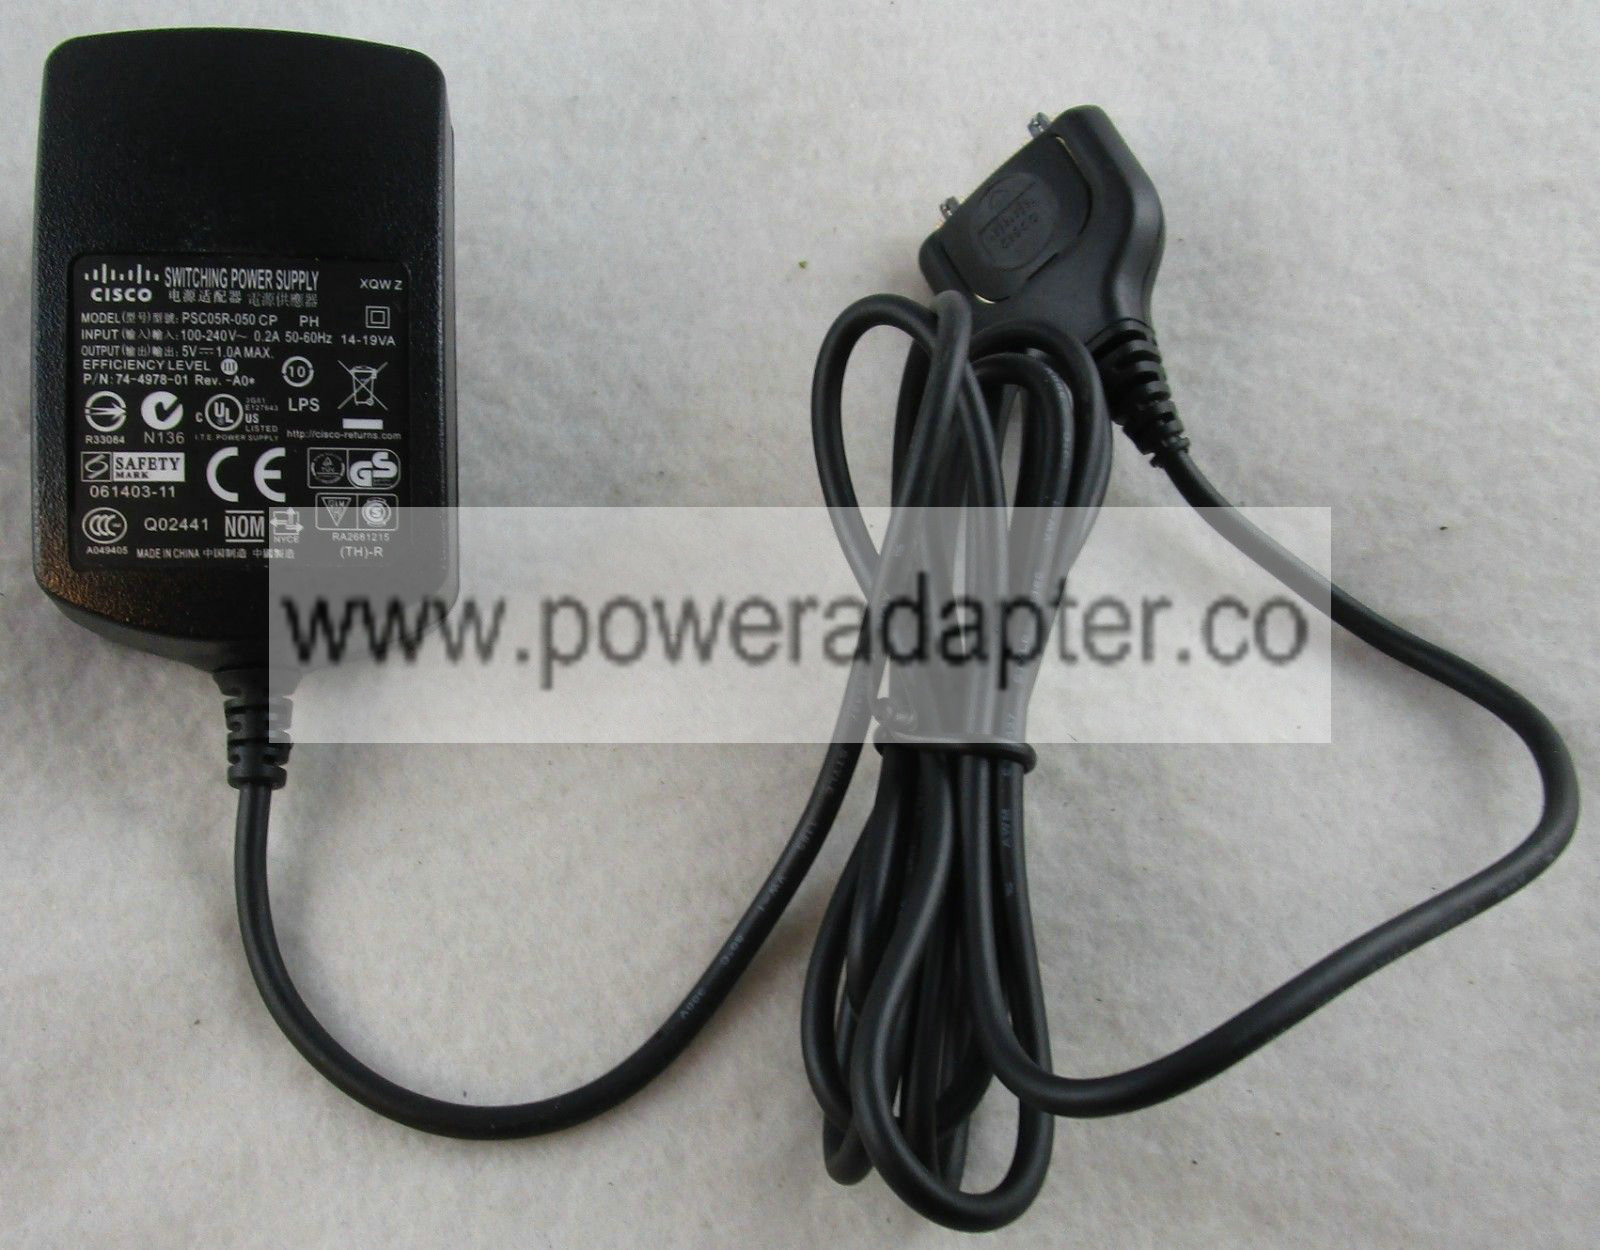 Genuine Cisco 7925 Phone 5V 1A Power Supply AC Adapter PSC05R-050 CP Bundled Items: Power Cable MPN: PSC05R-050 C